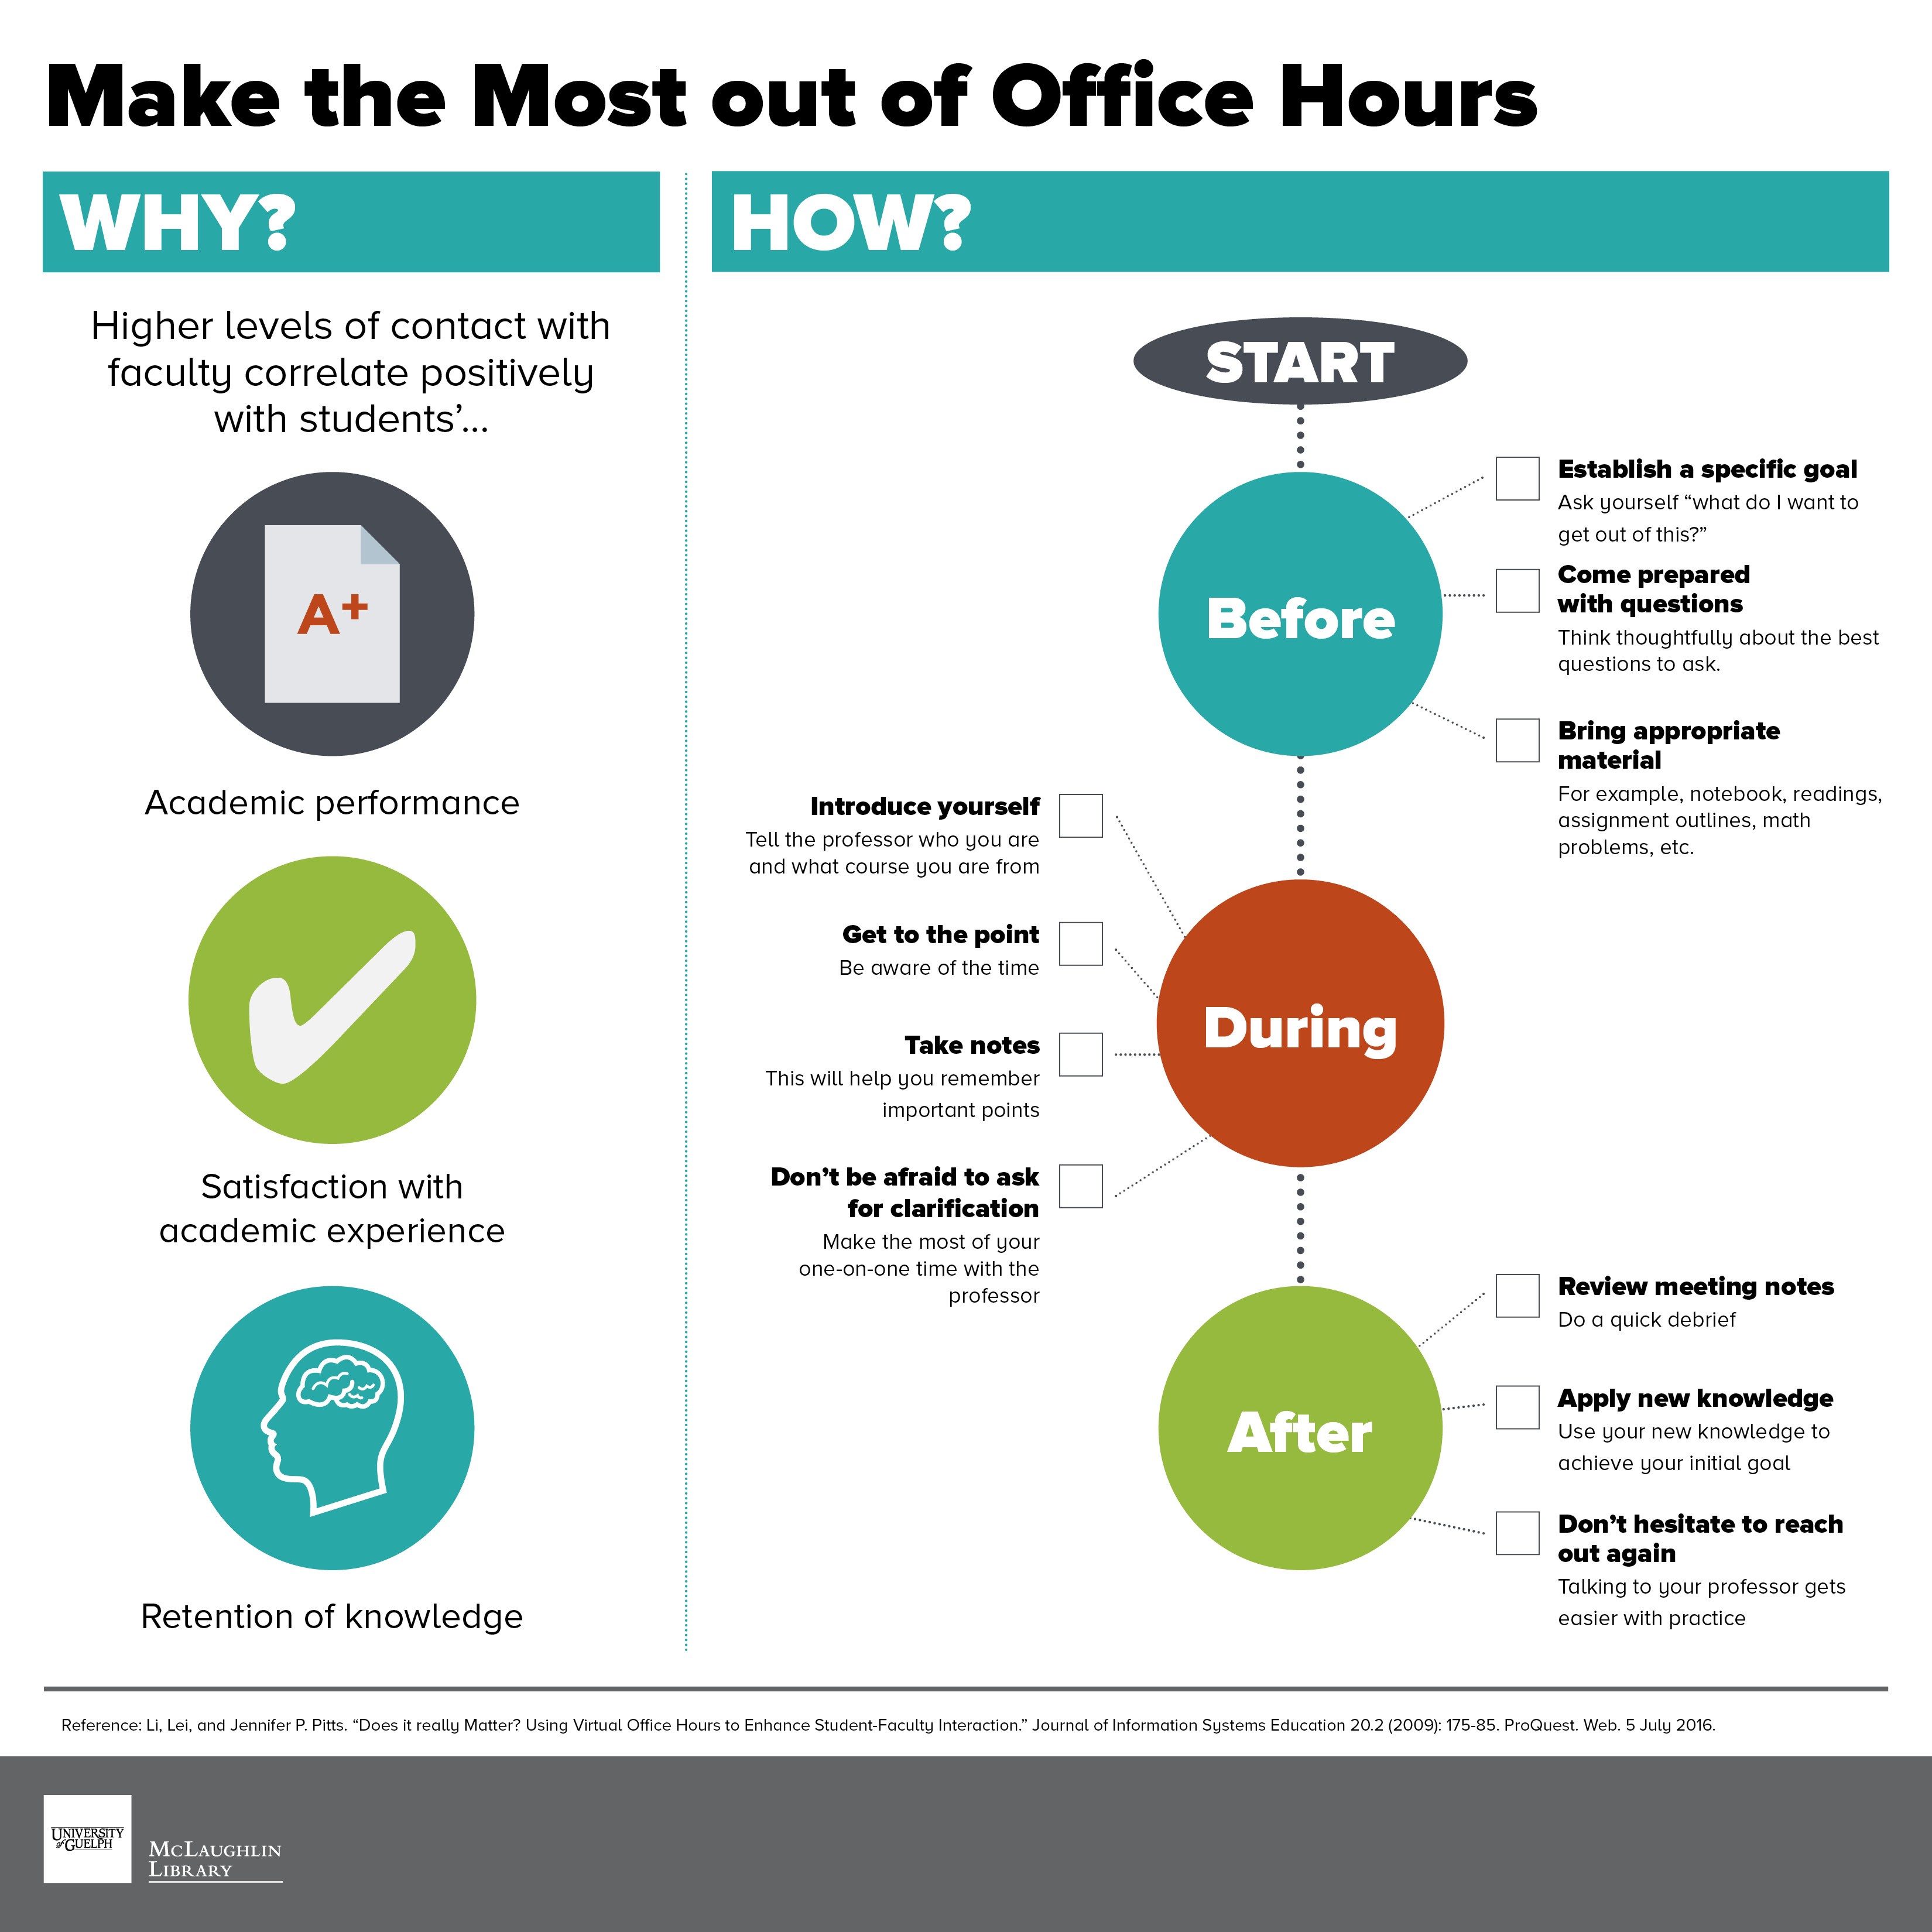 Make the Most out of Office Hours (see transcript below)